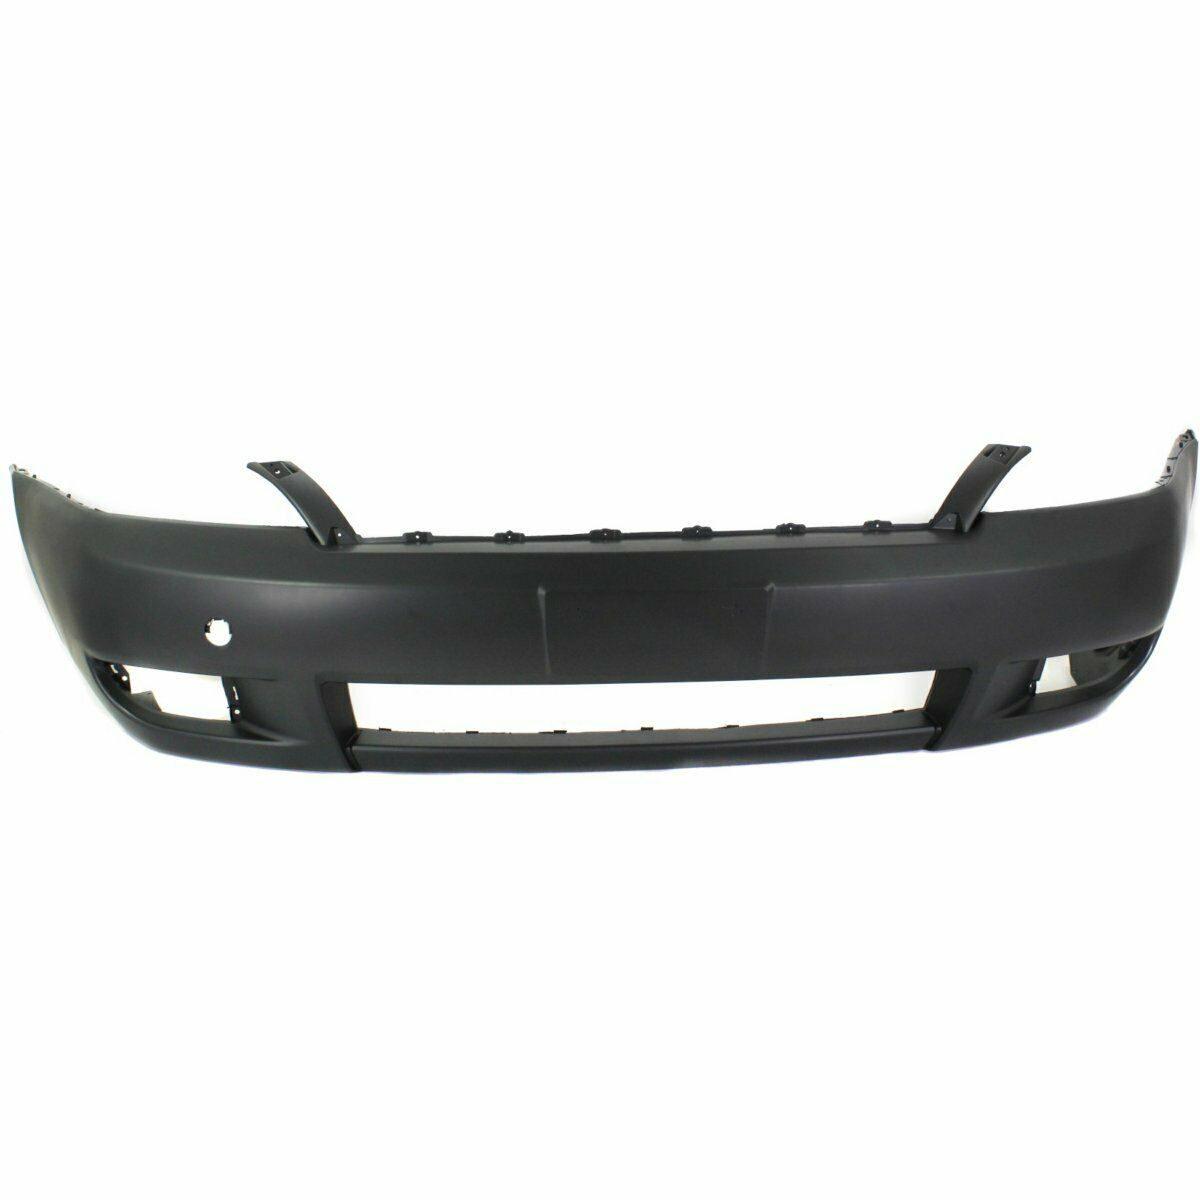 2006-2012 Kia Sedona Front Bumper Painted to Match